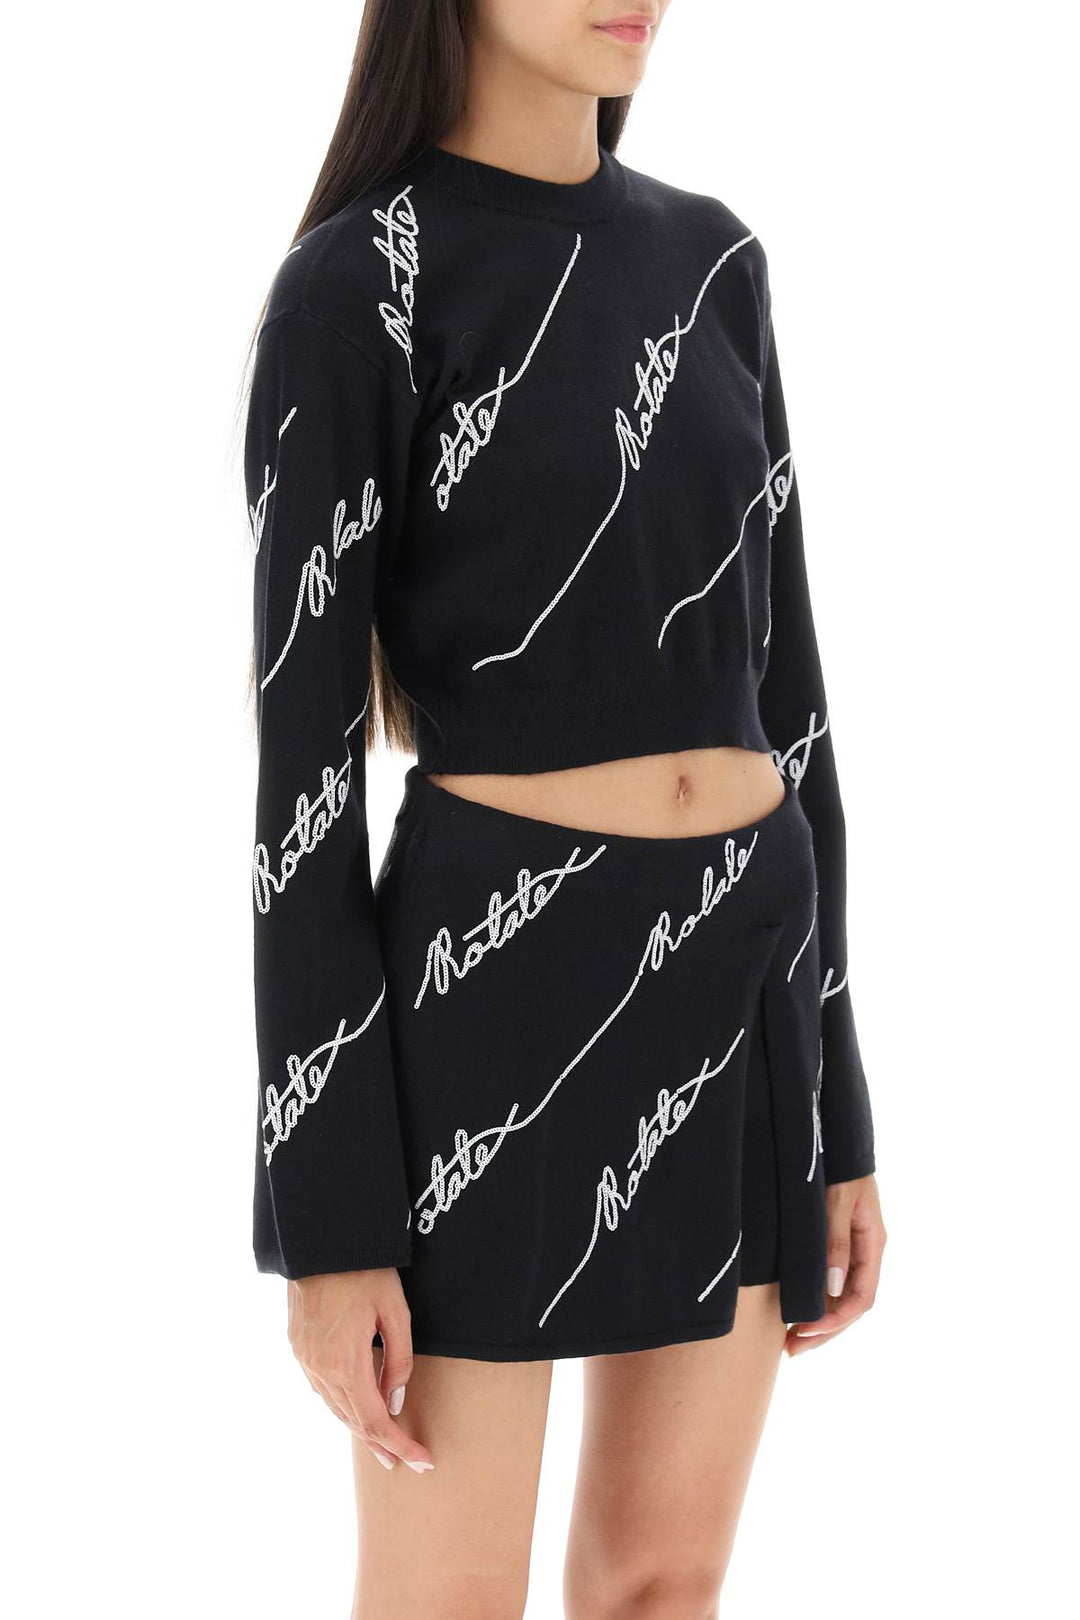 Rotate Sequined Logo Cropped Sweater   Nero